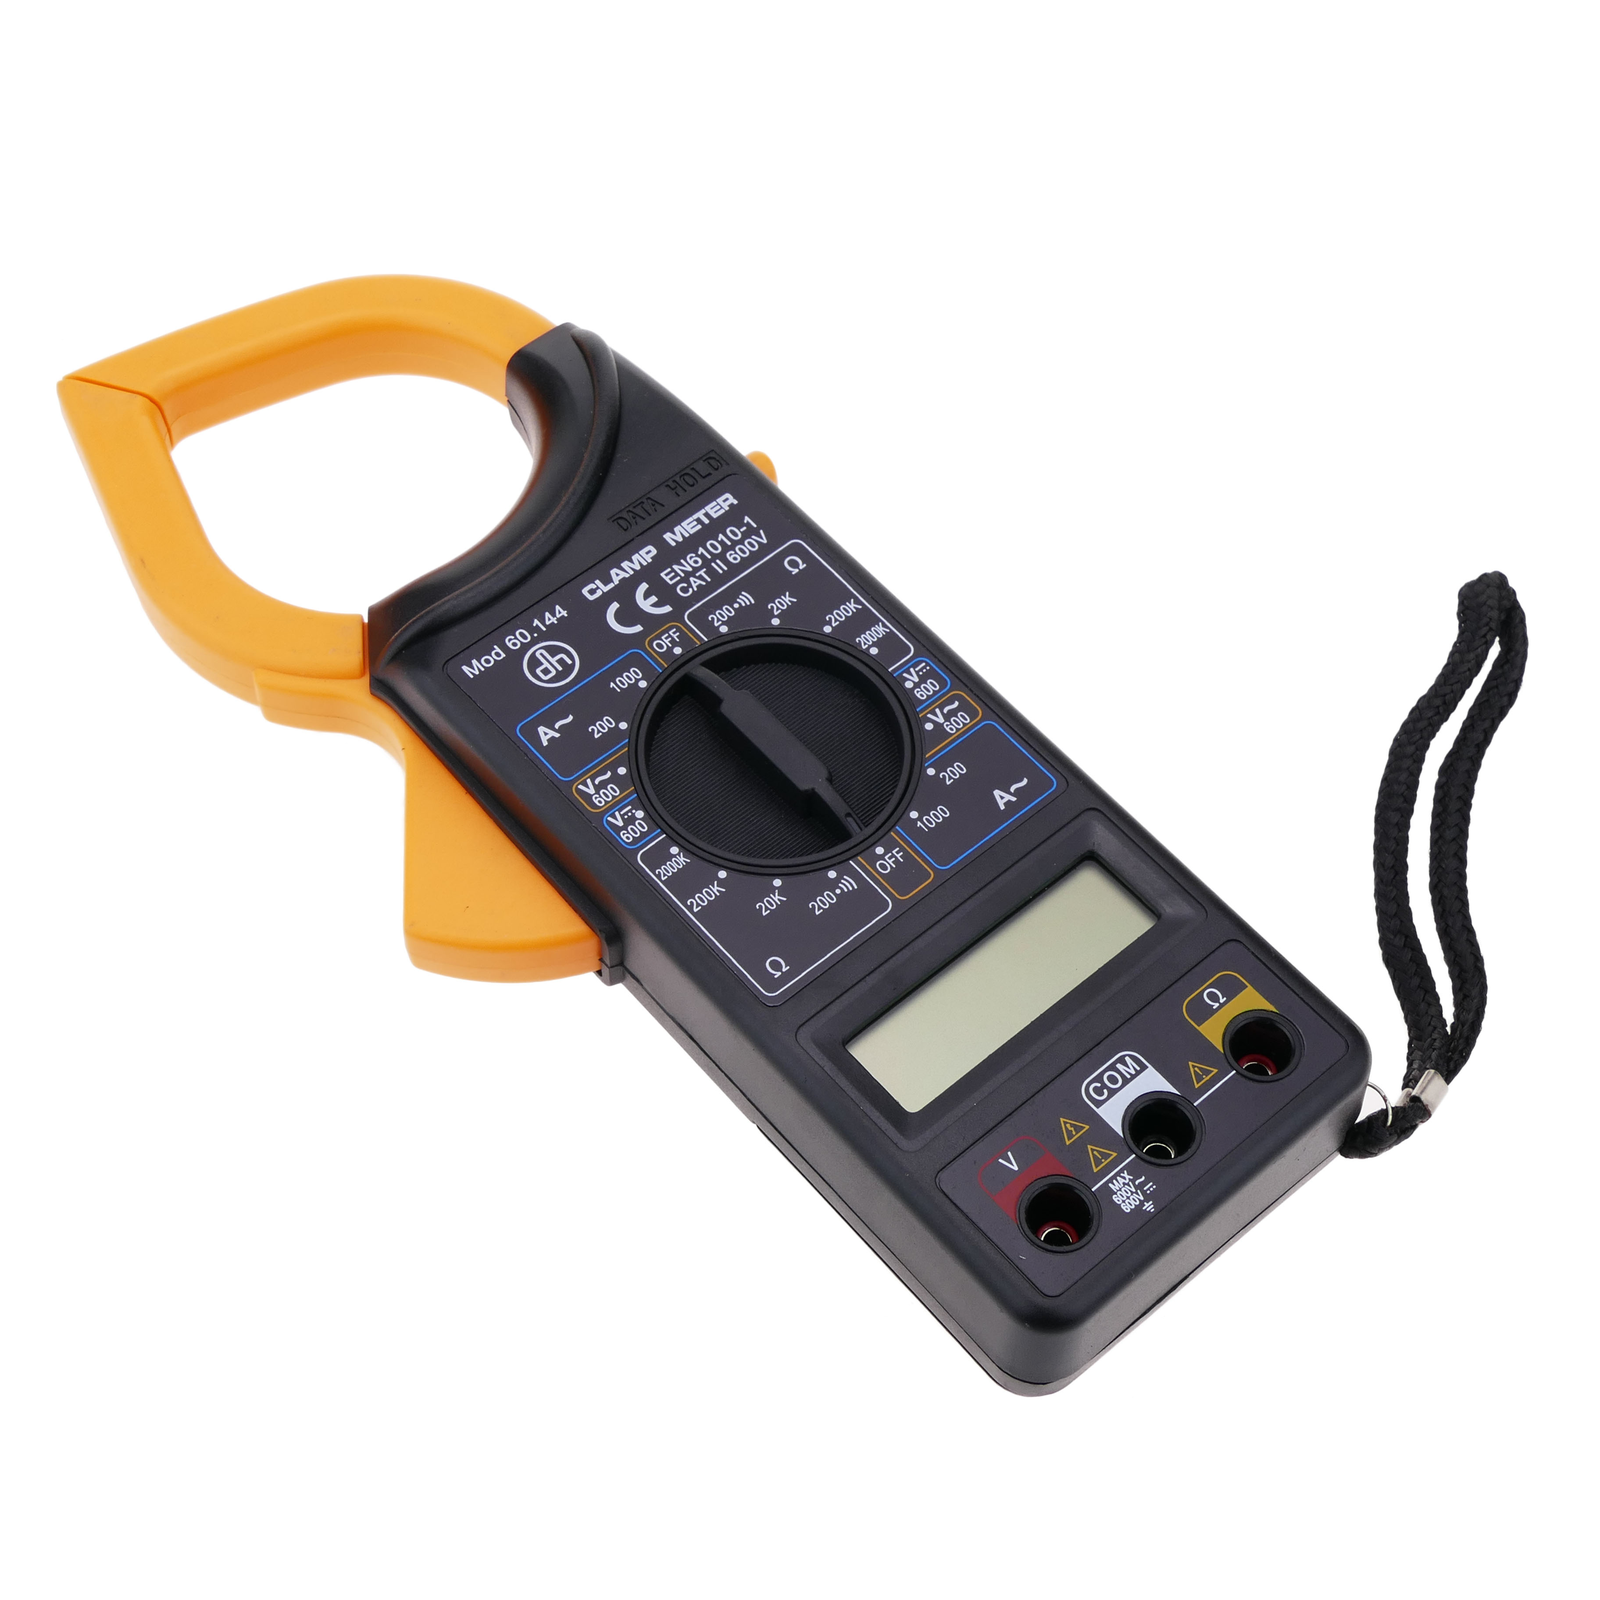 Digital clamp meter AC/DC 1000A - Cablematic